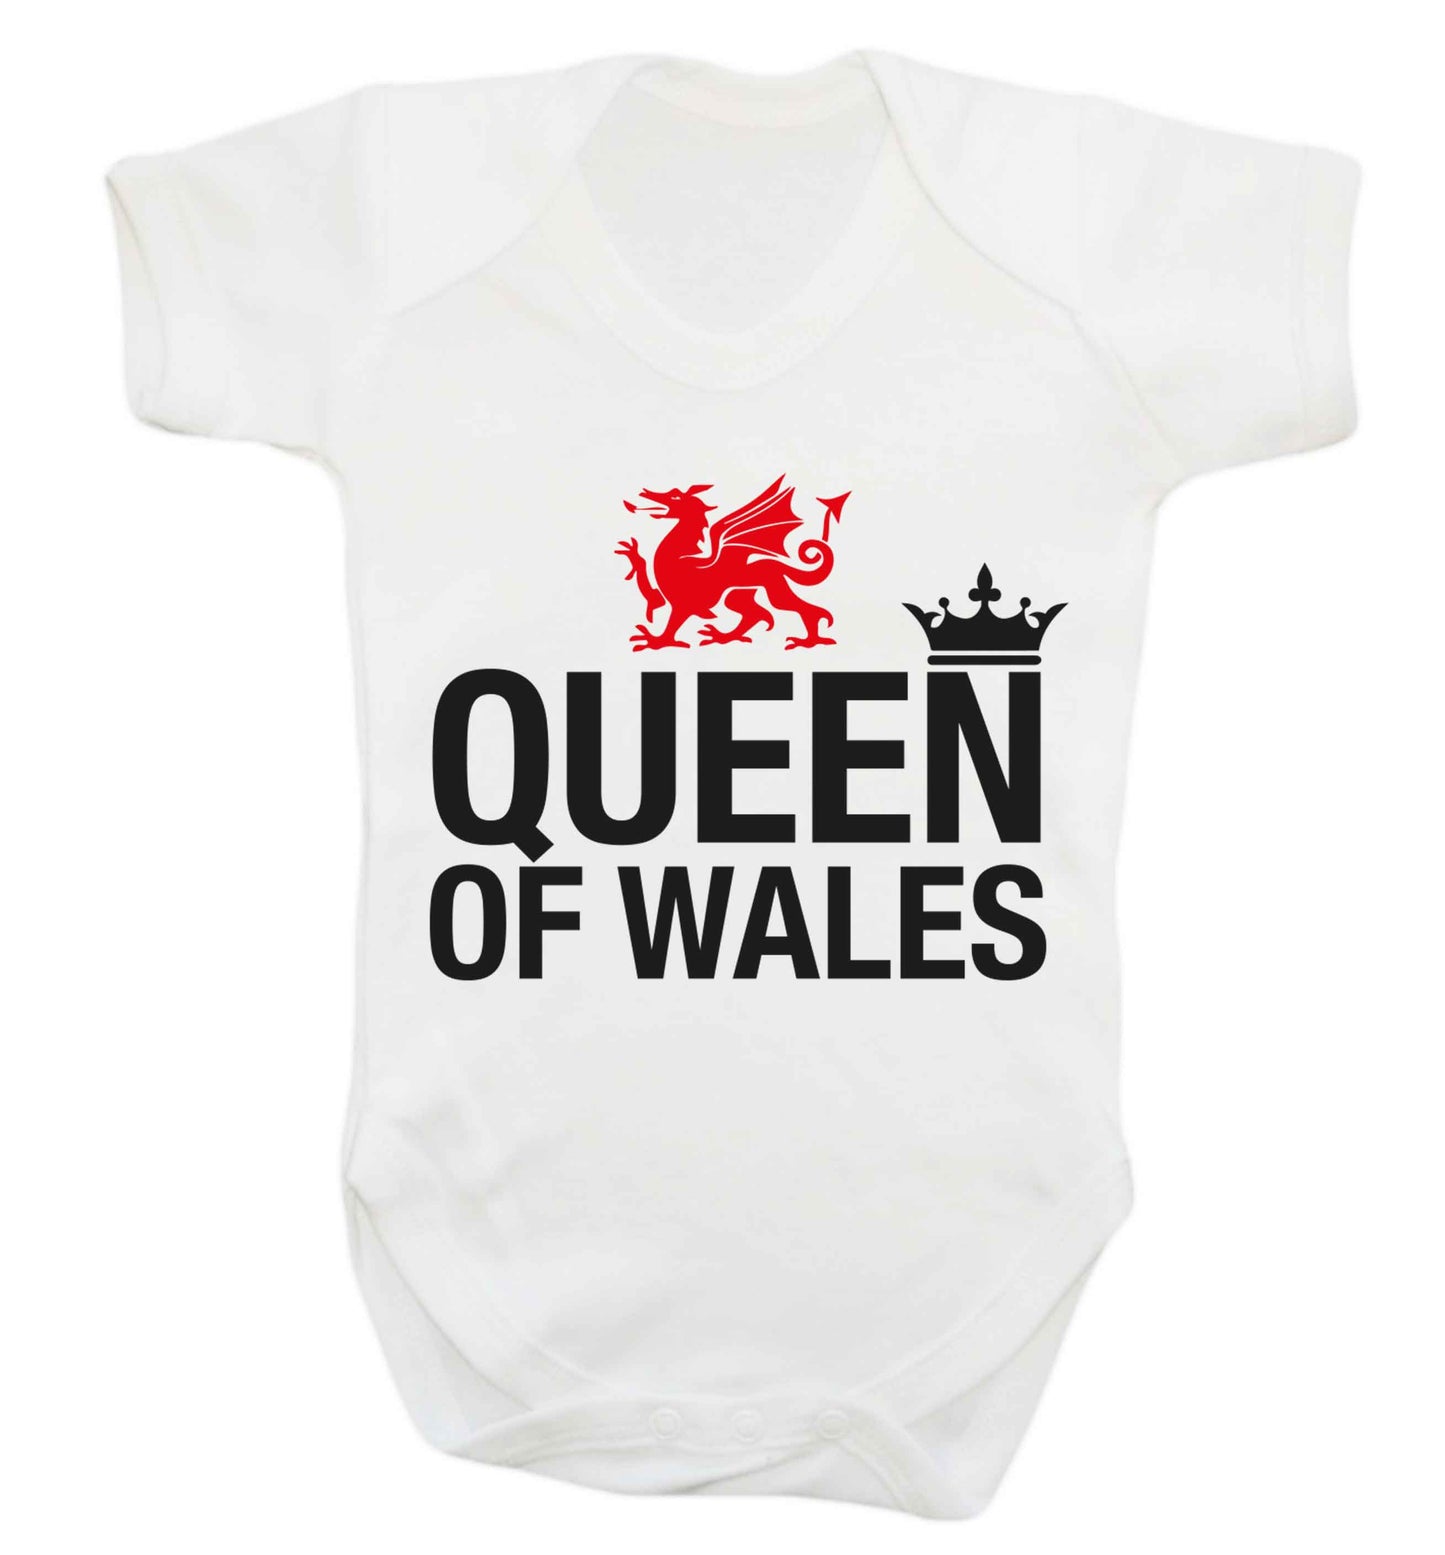 Queen of Wales Baby Vest white 18-24 months